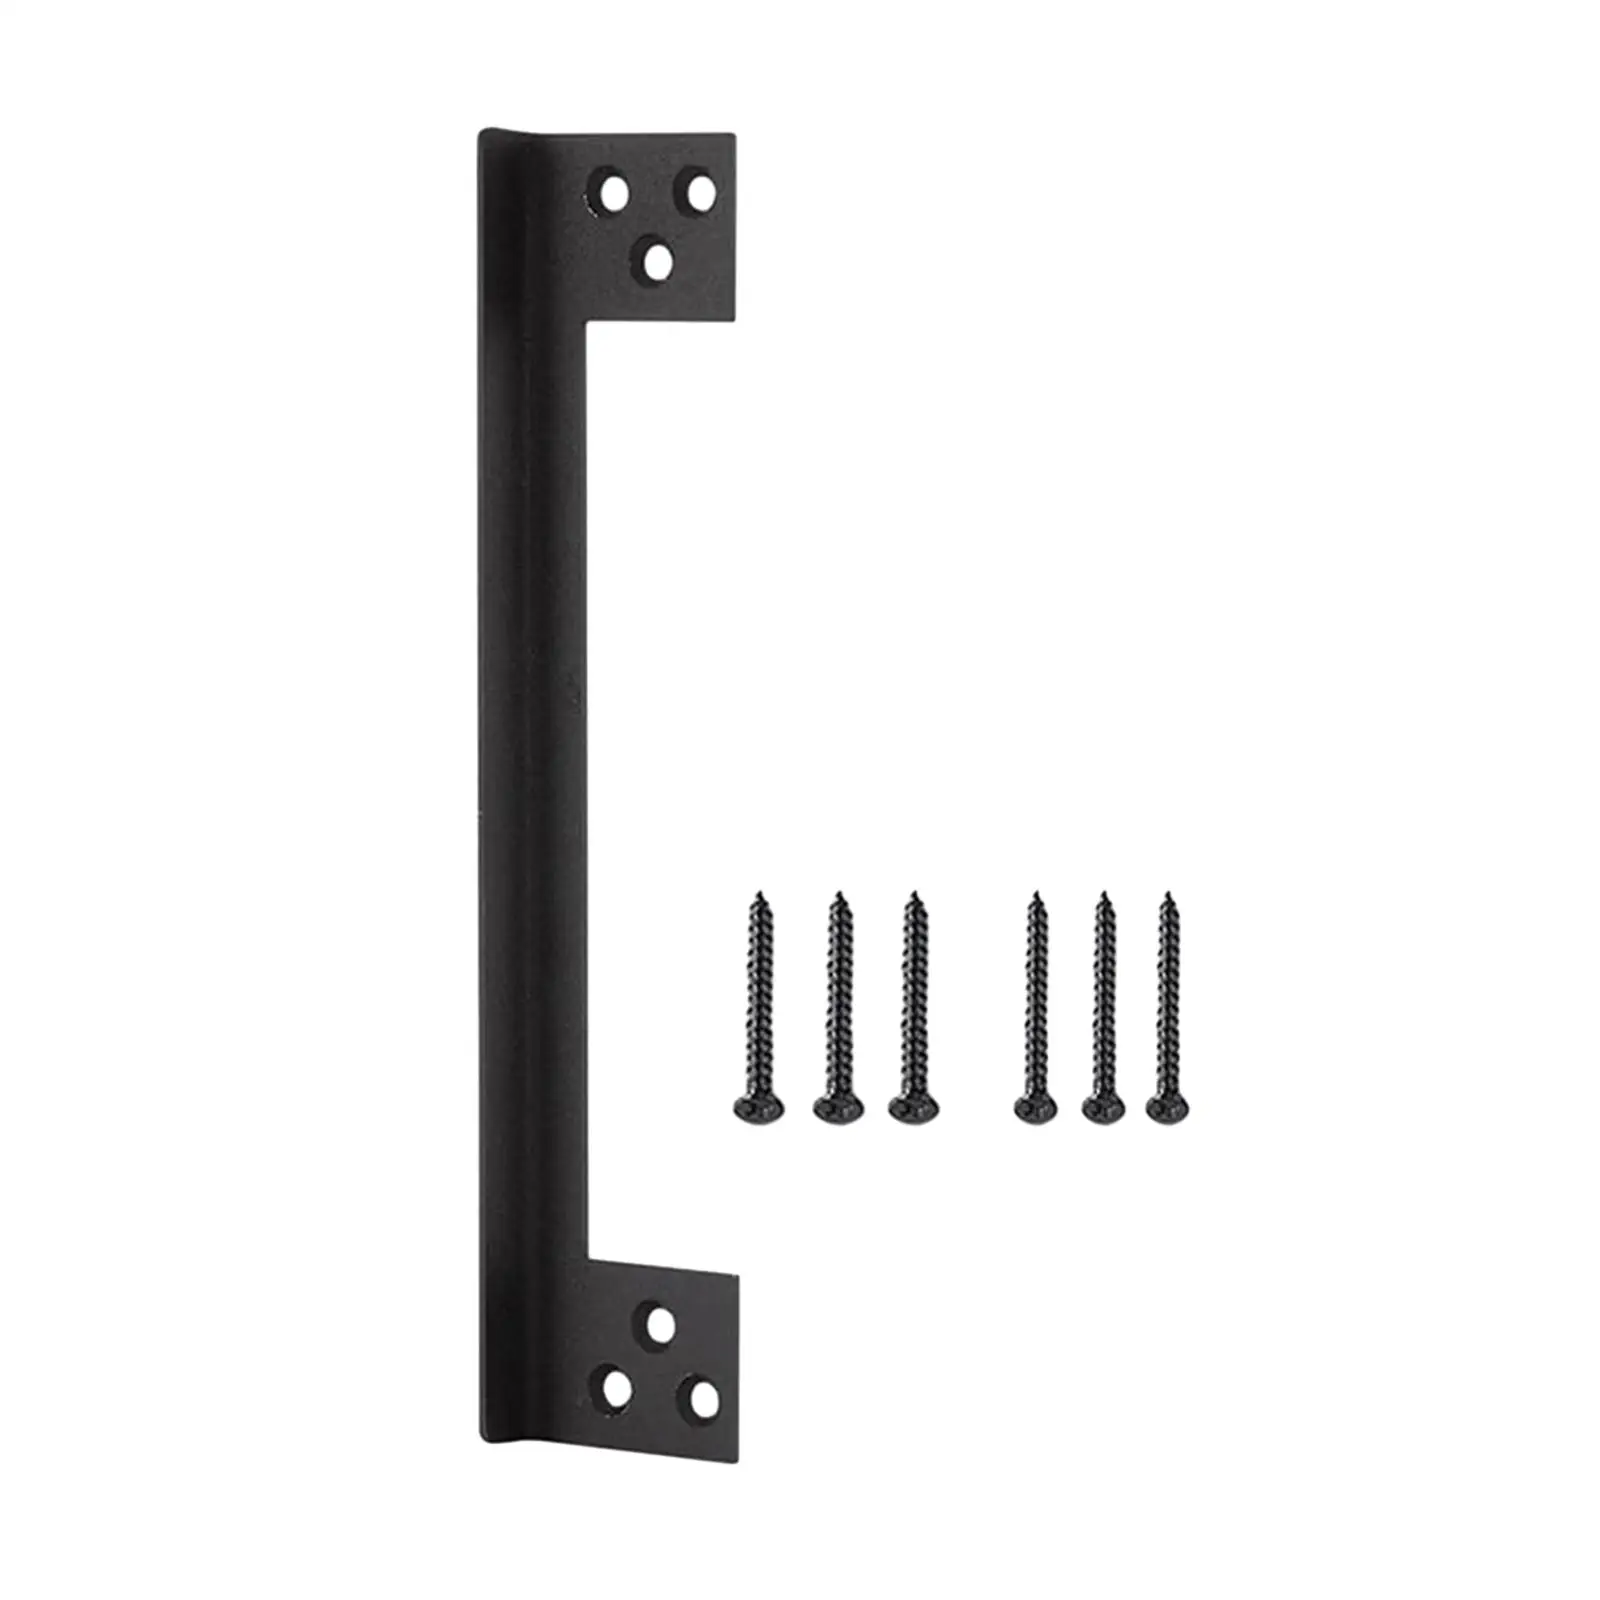 Door Latch Guard Plate Cover L Shaped Easy to Install for Left or Right Hand Doors Door Lock Latch Latch Protective Cover